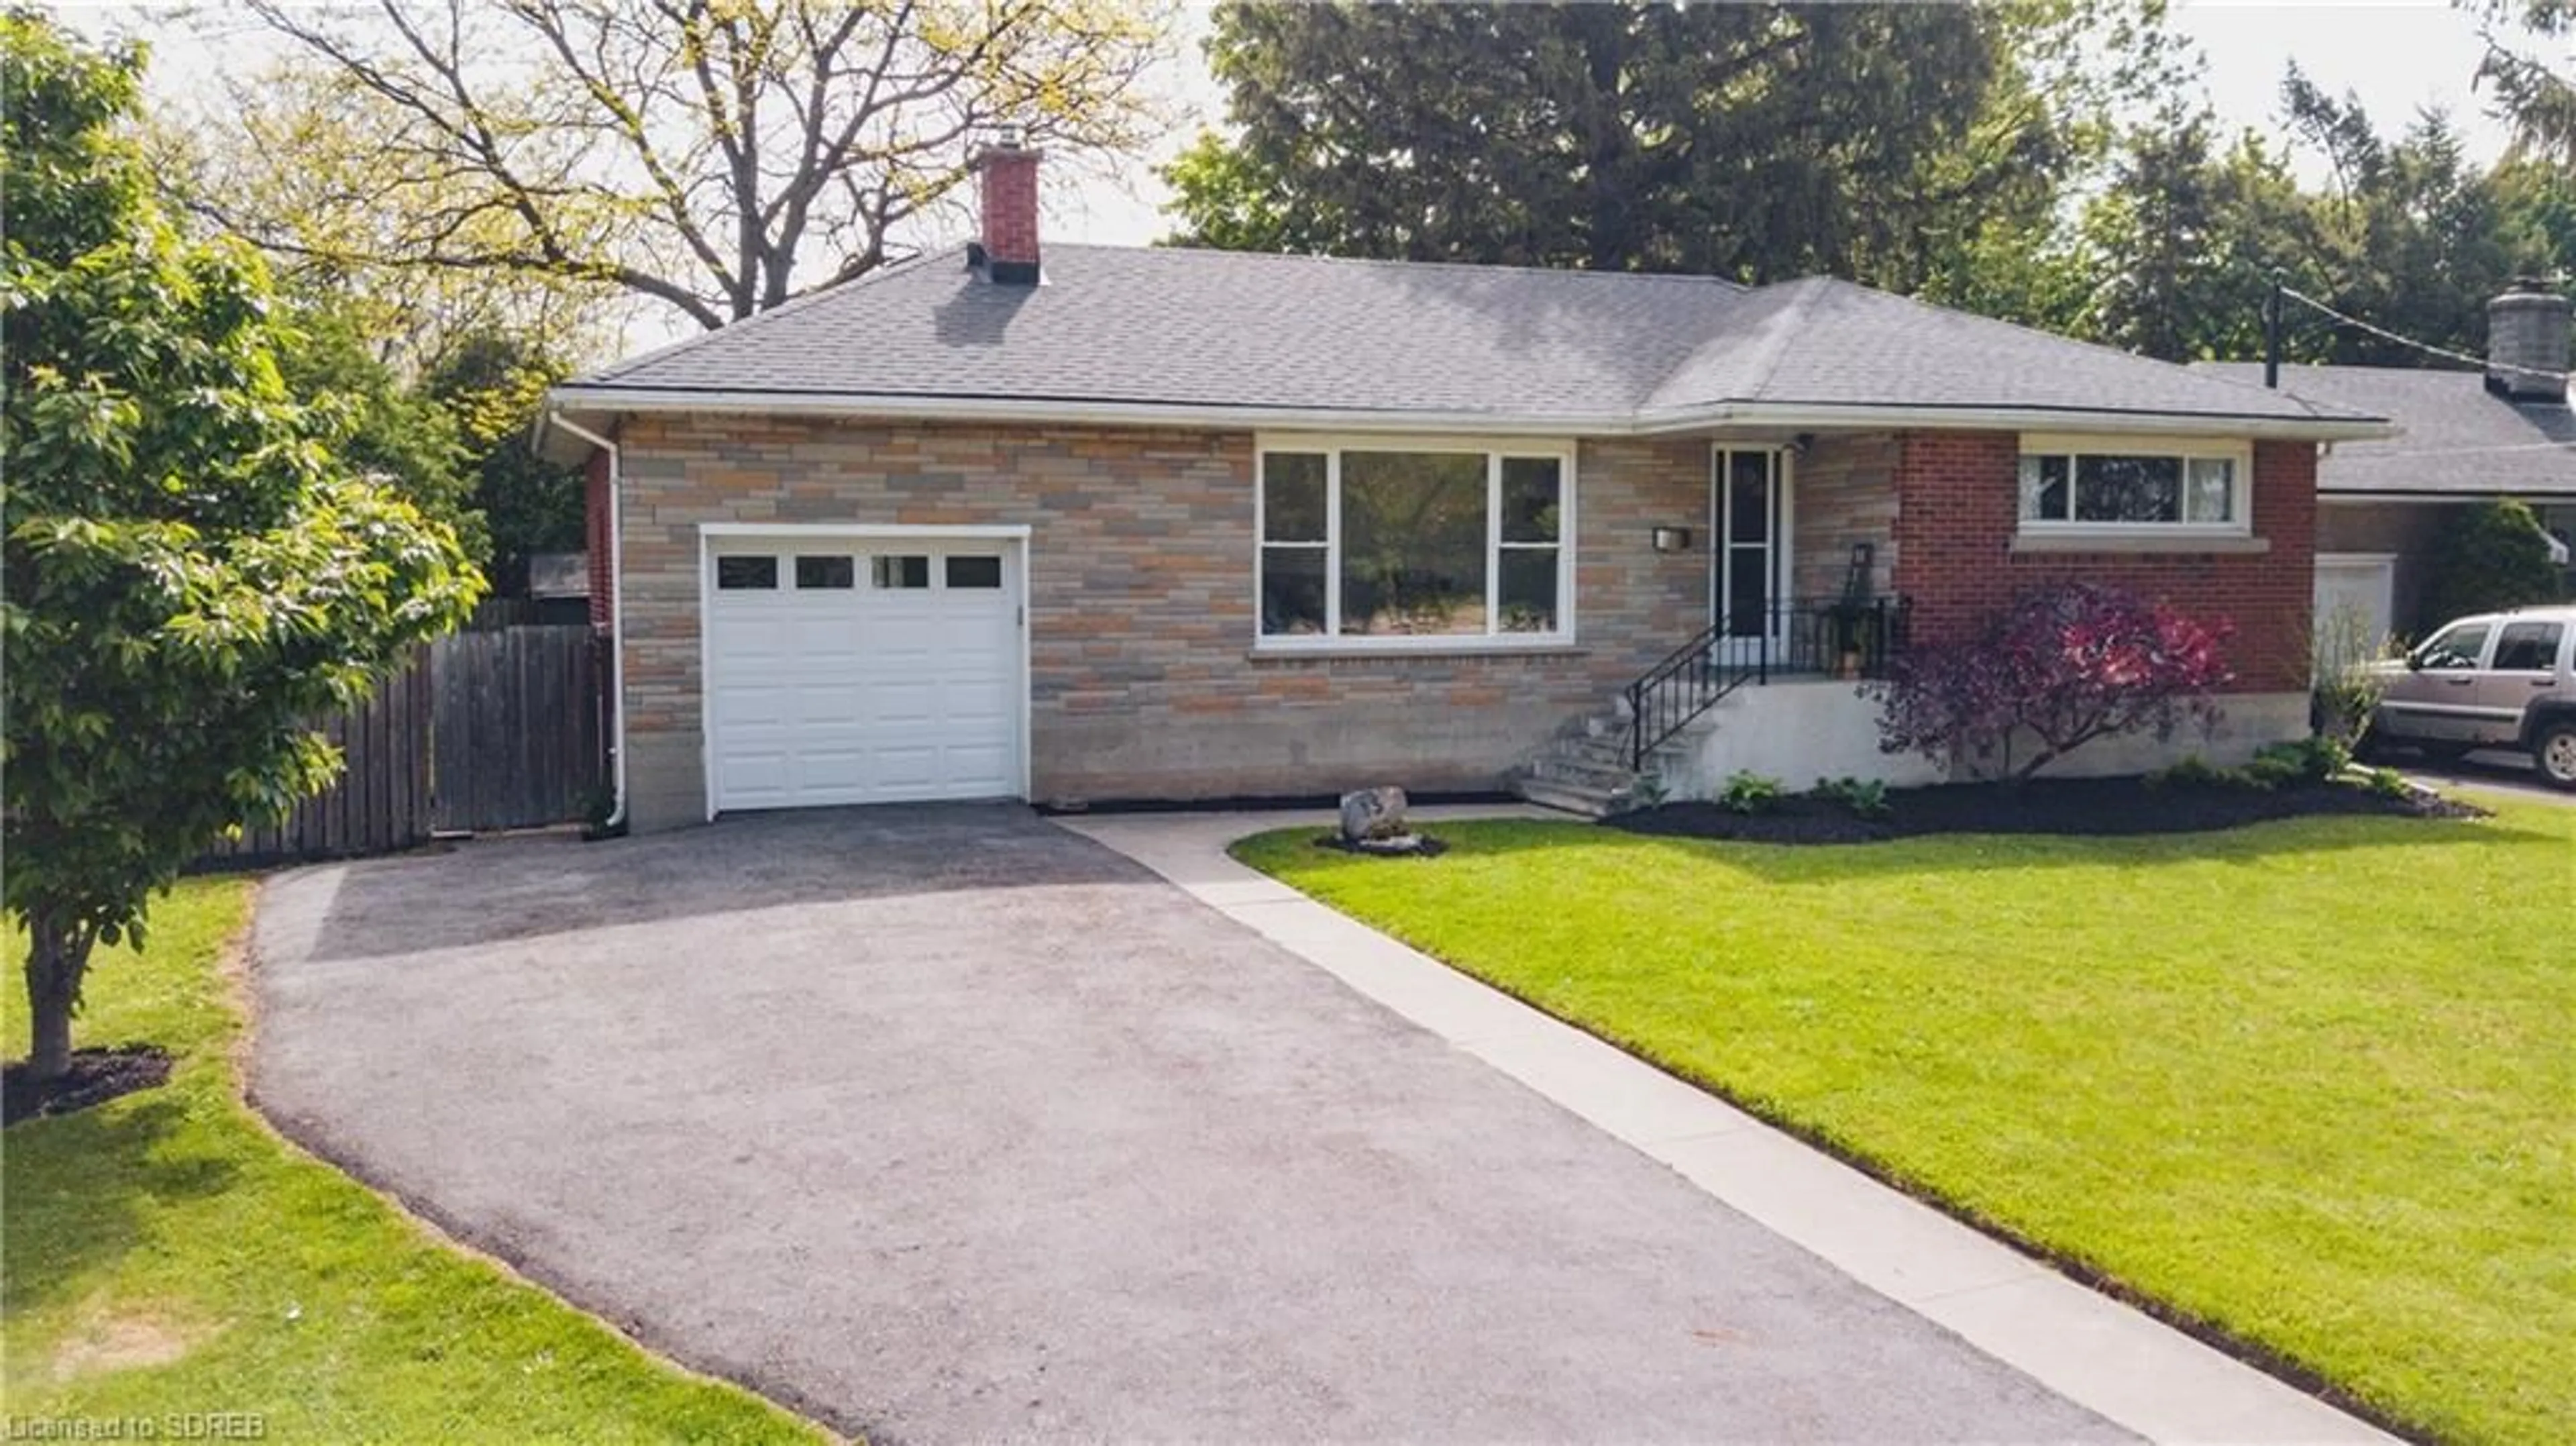 Home with brick exterior material for 15 Second Ave Ave, Brantford Ontario N3S 6P9